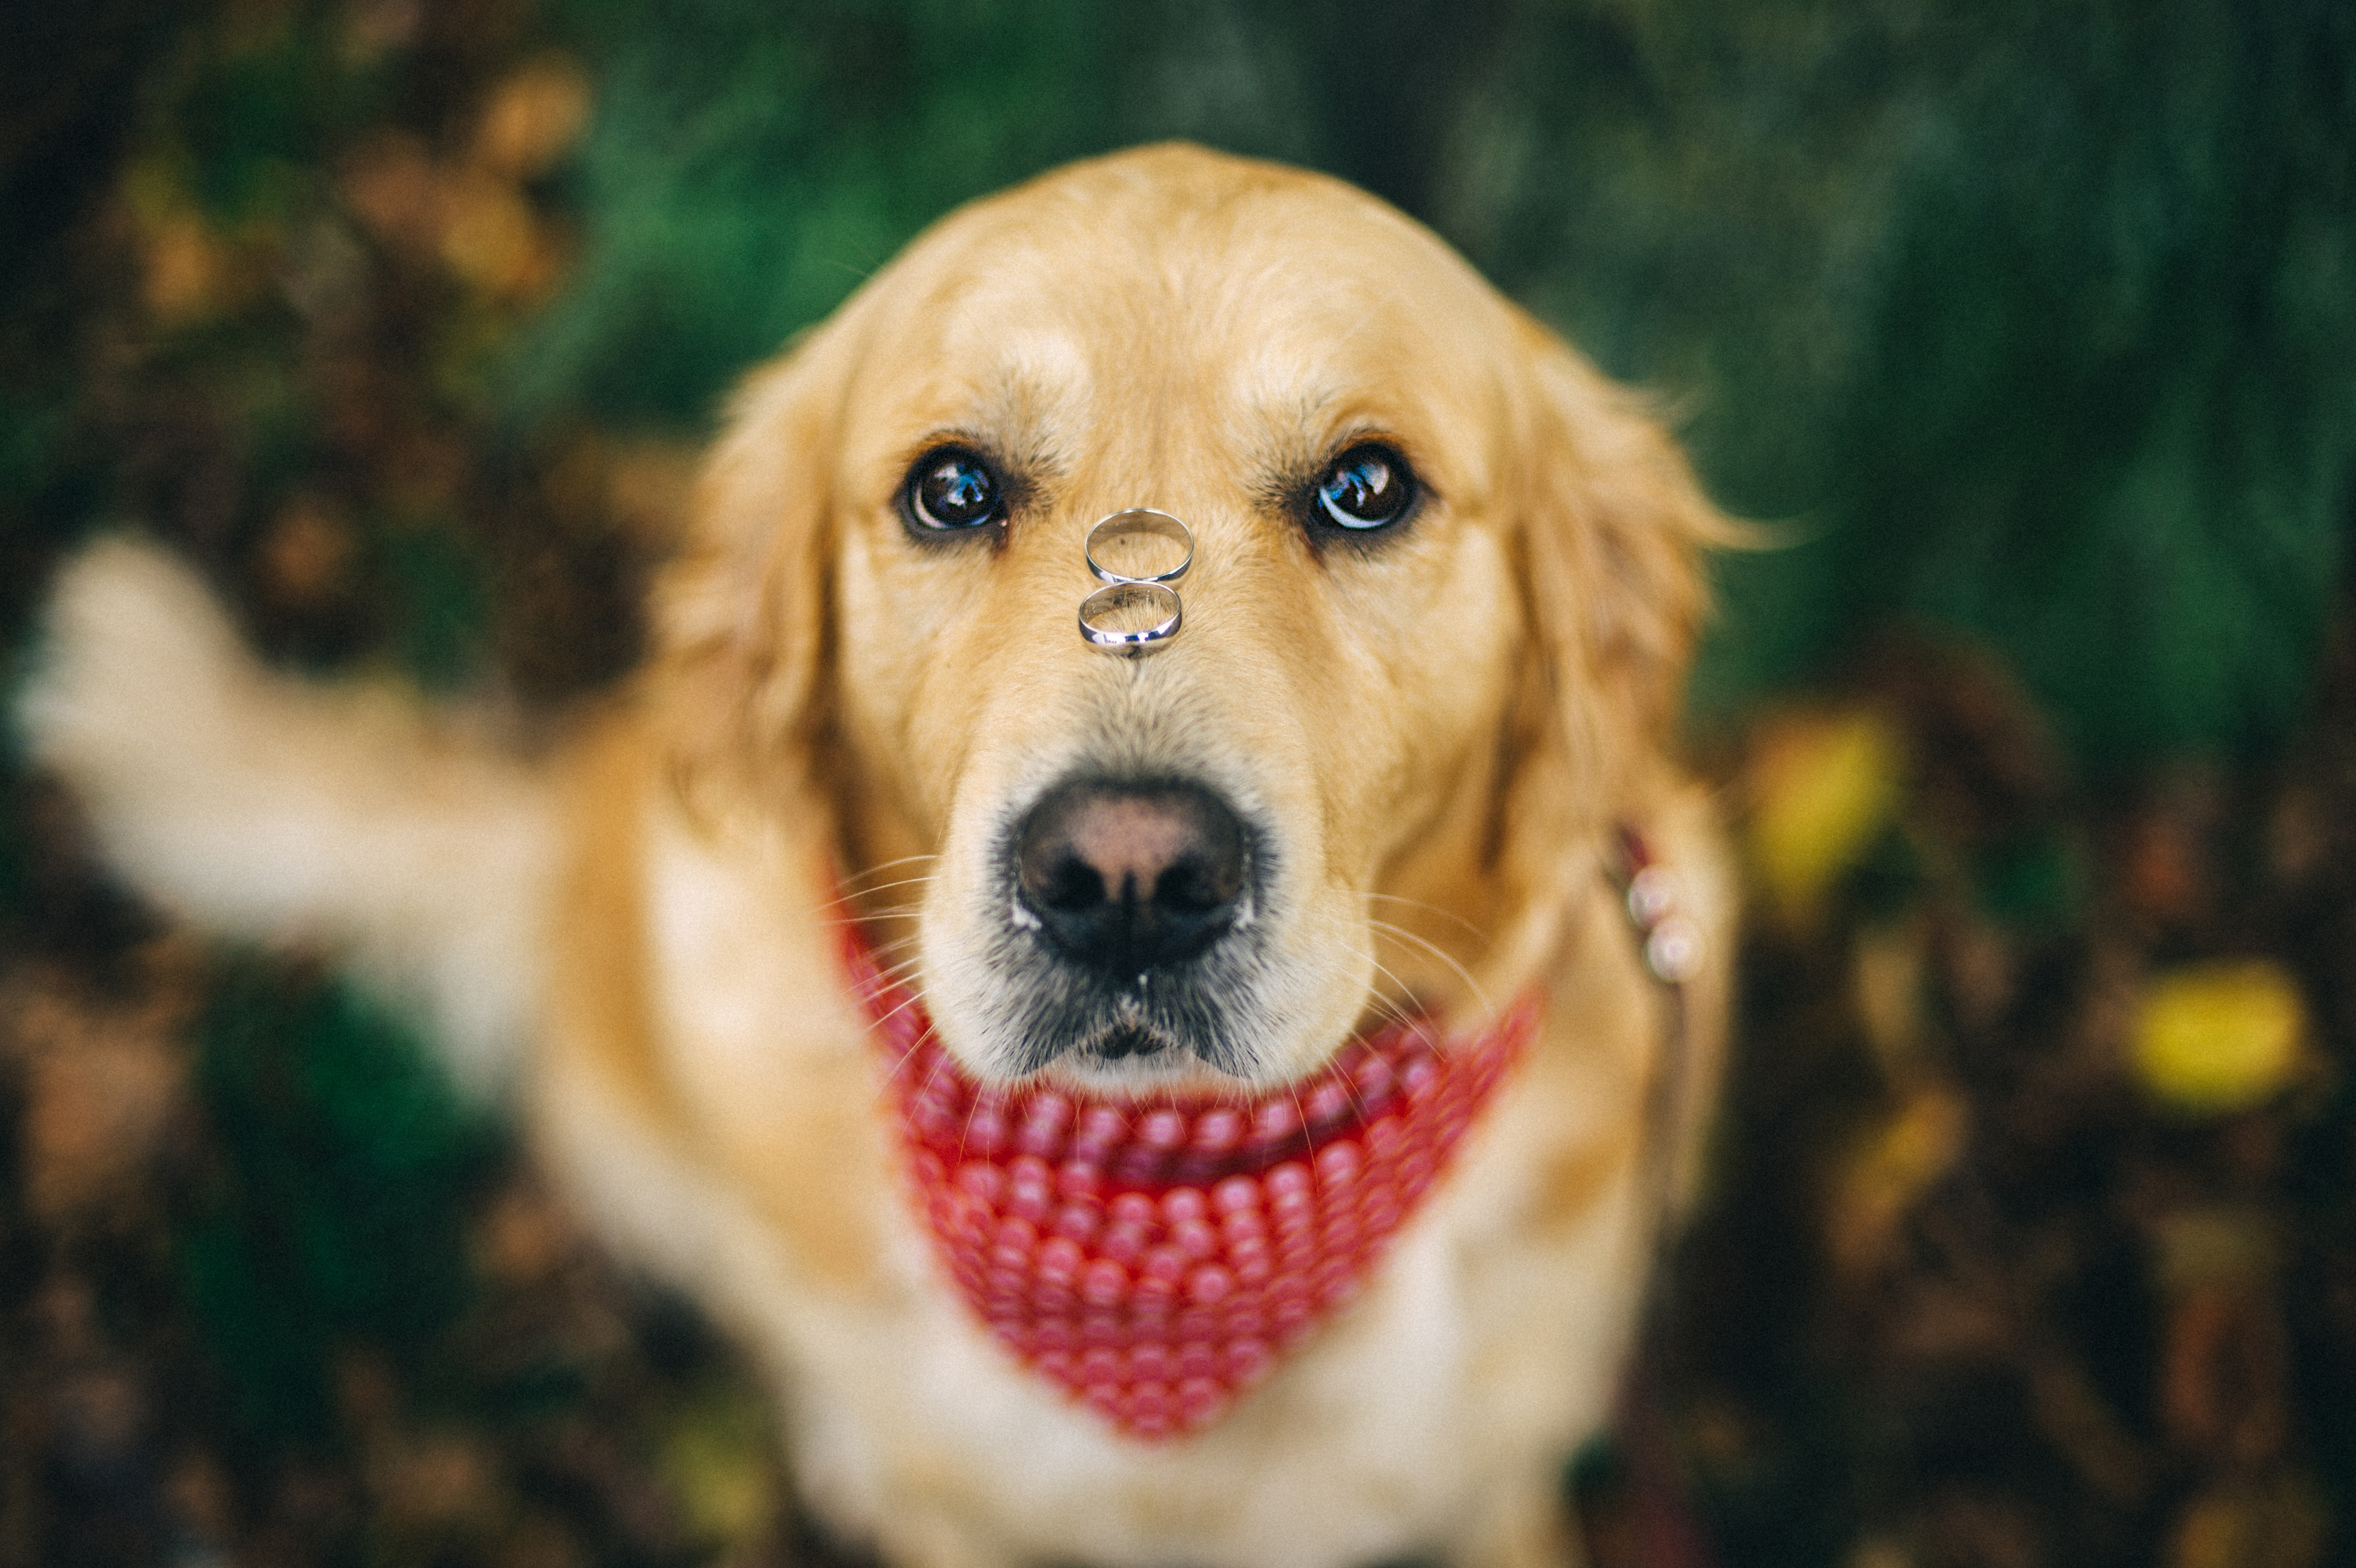 A dog with two rings on its nose | Source: Getty Images